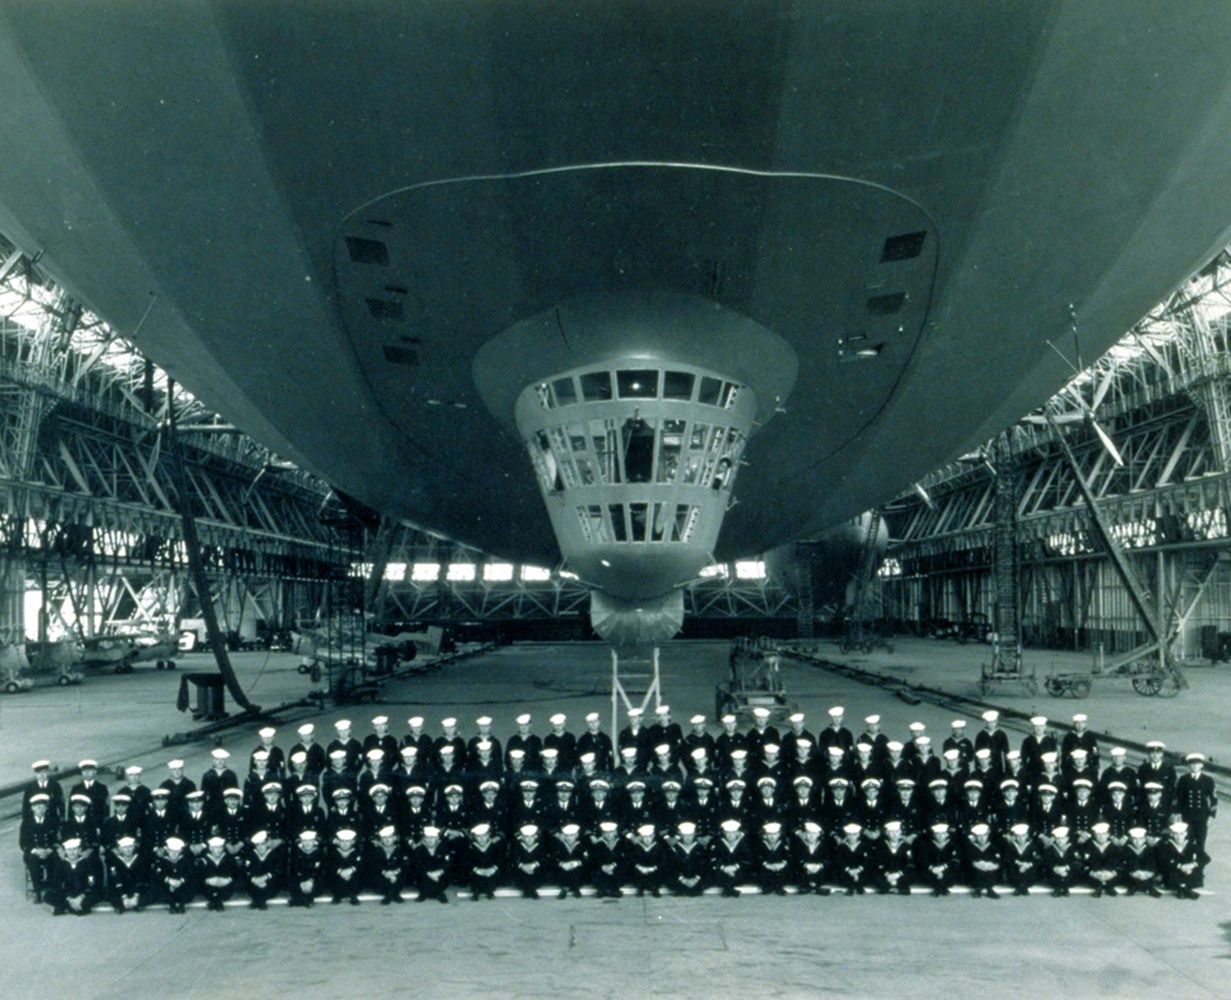 115 Navy officers and crew members pose in 4 rows under the USS Macon dirigible moored inside Hangar 1.